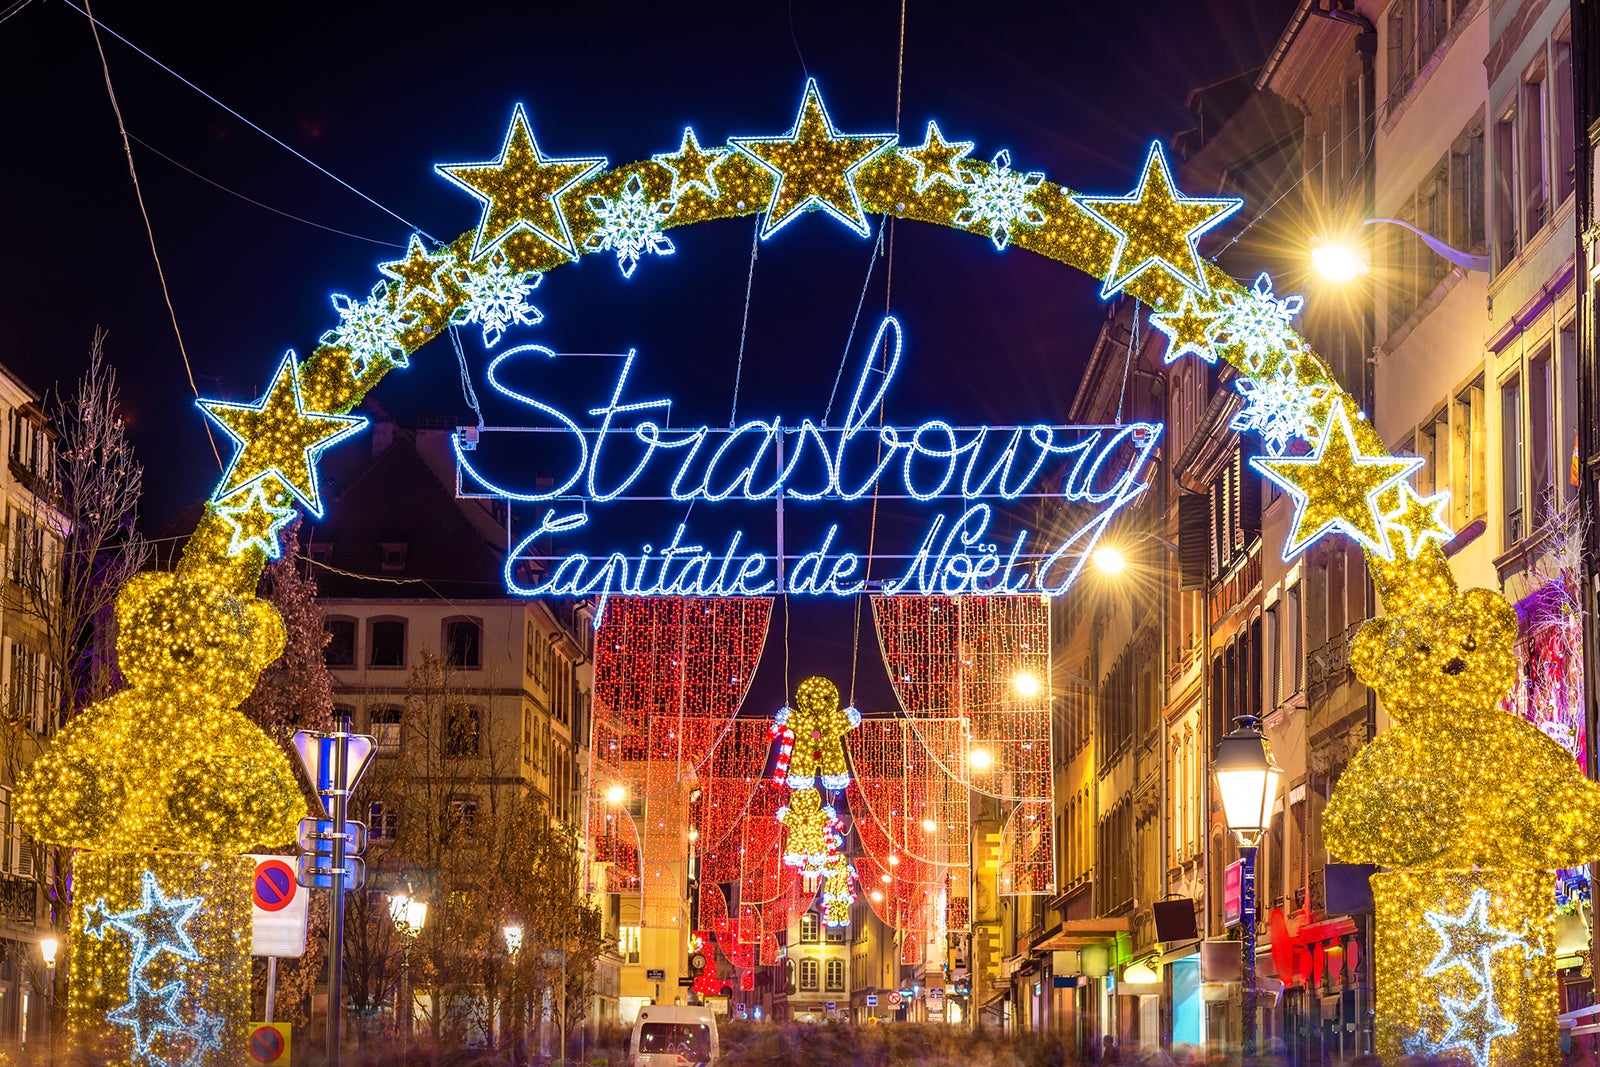 Christmas decorations and lights in Strasbourg, France